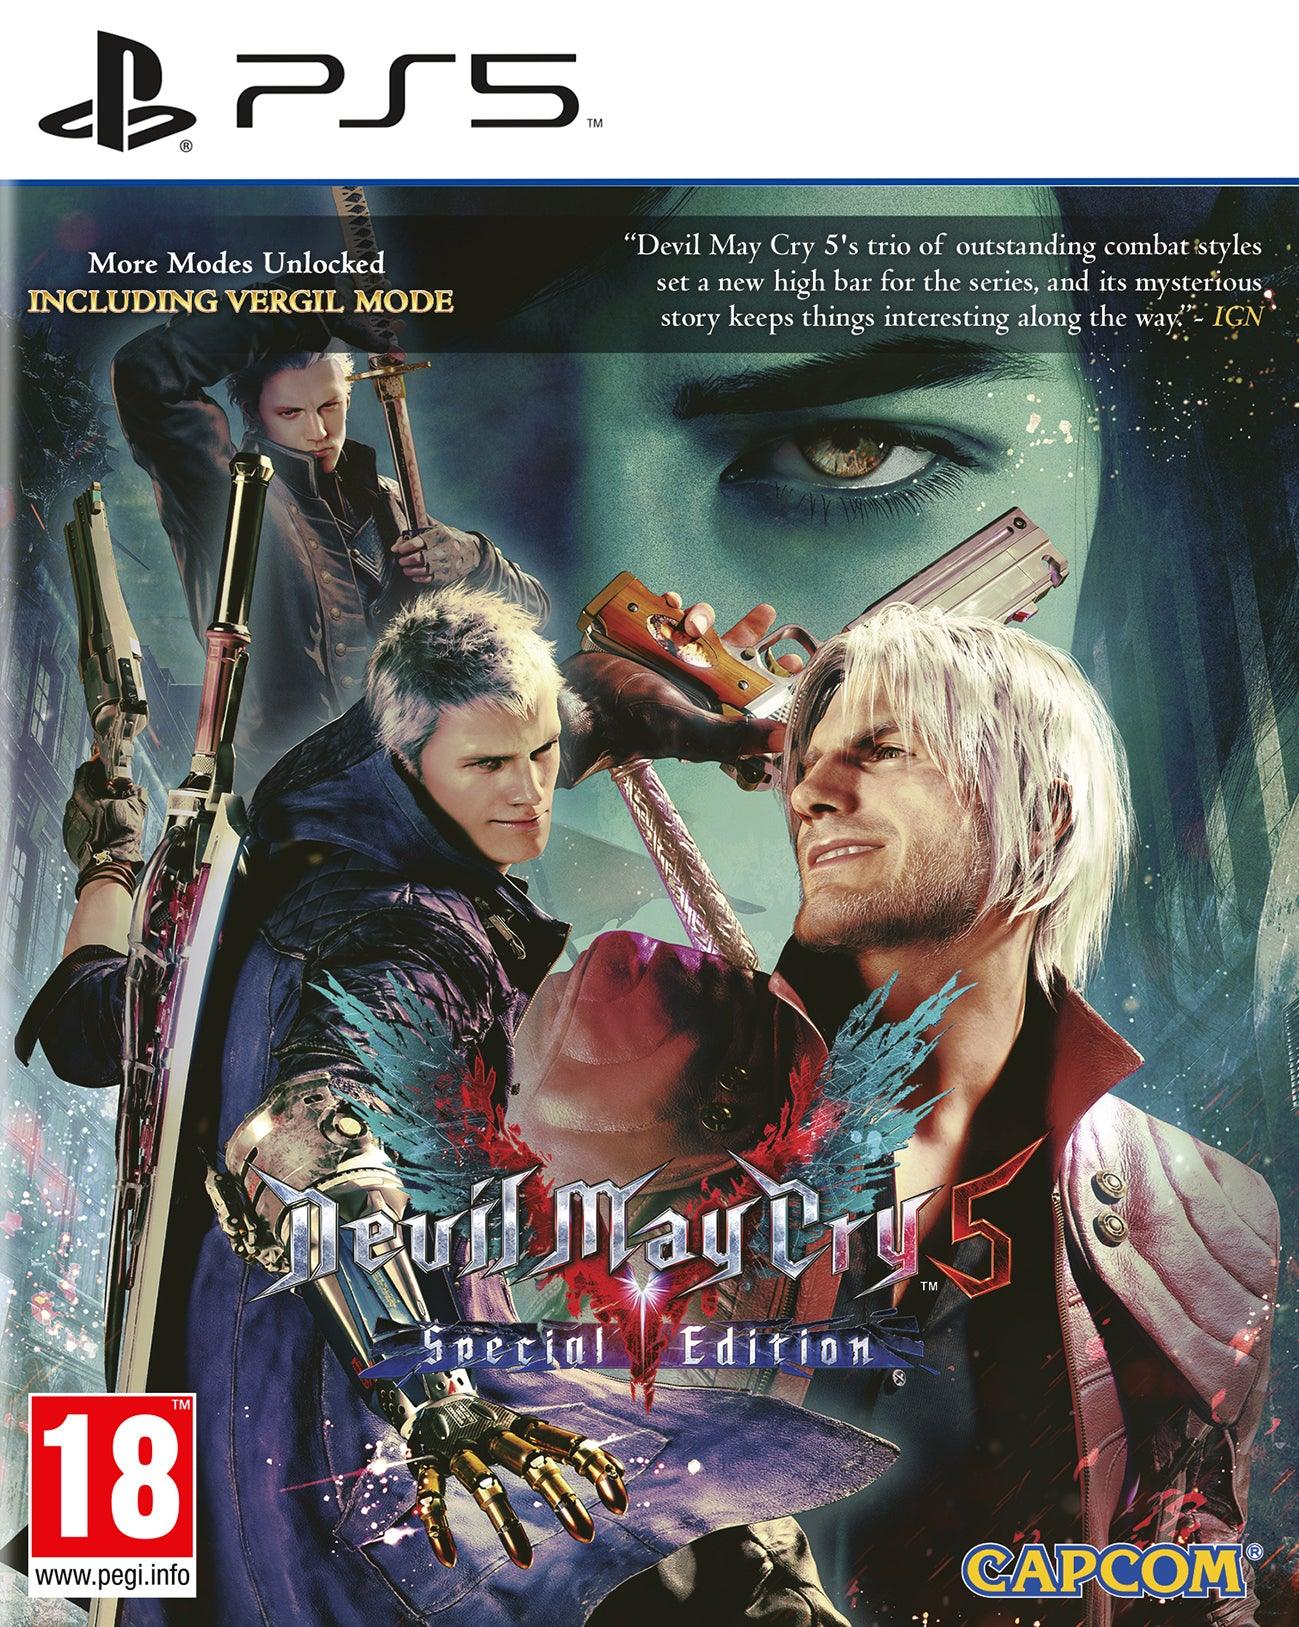 Devil May Cry 5 Special Editio - Want a New Gadget